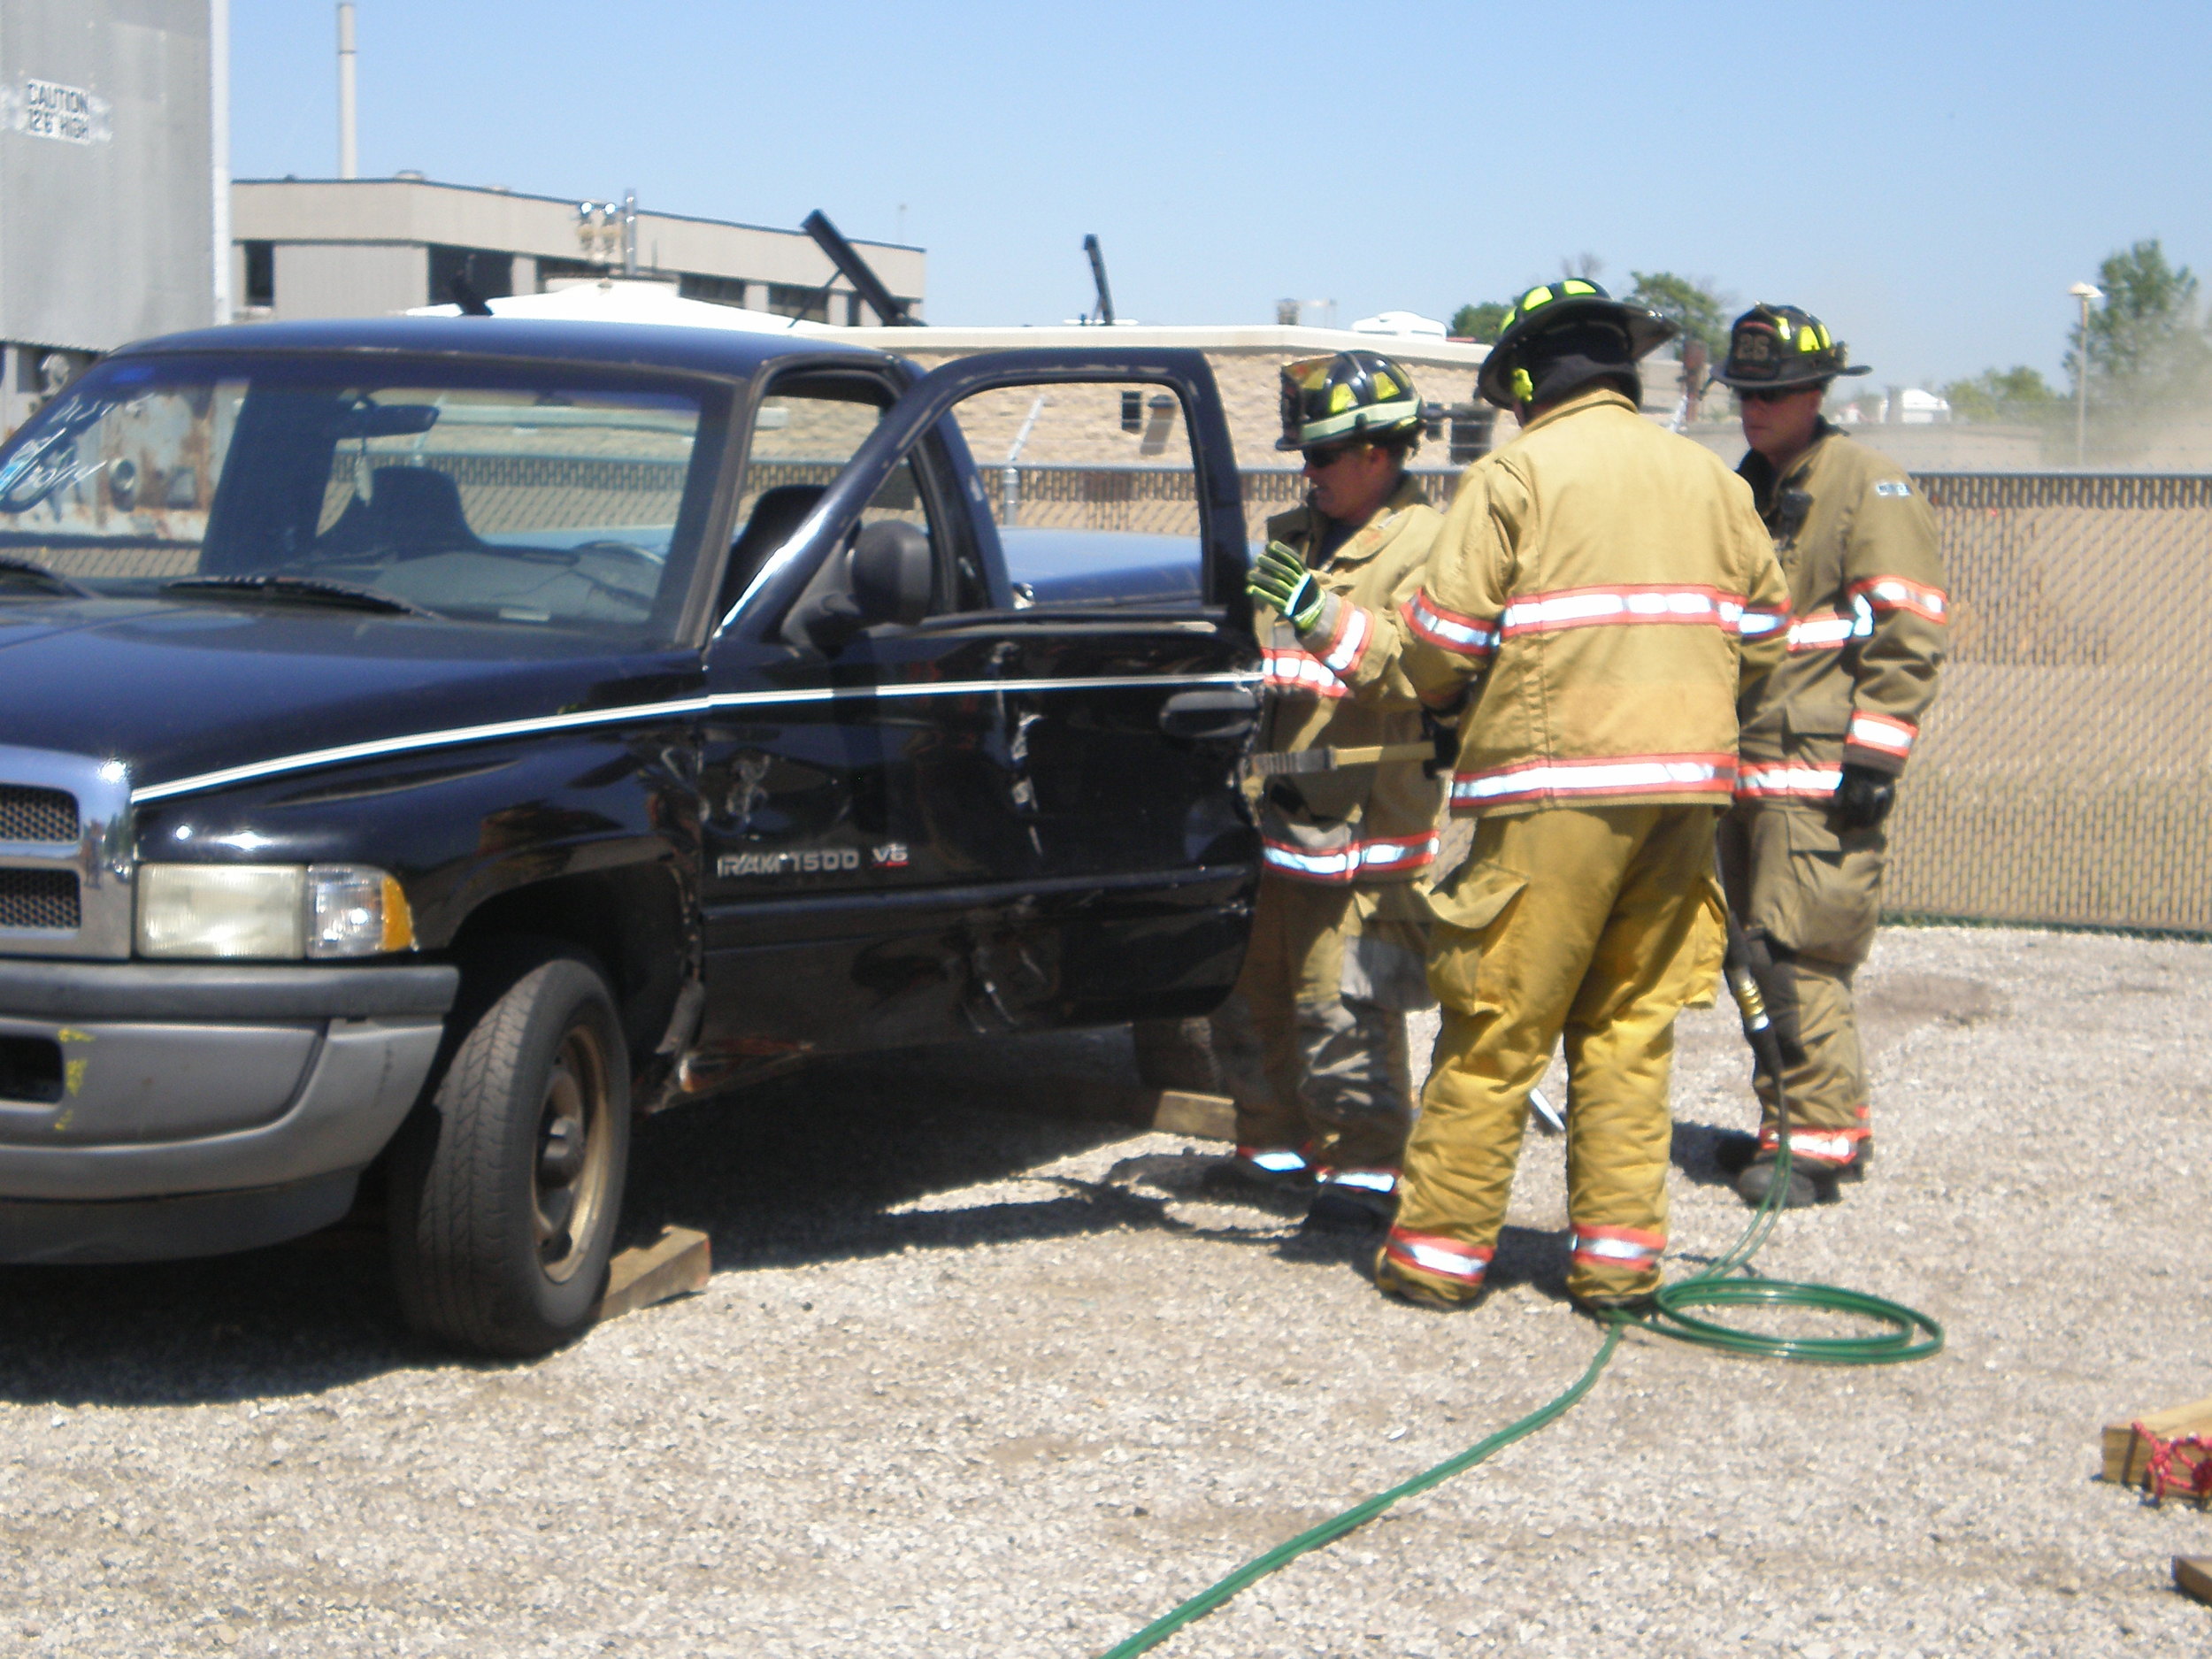 We donate junk cars to local fire & police departments. They practice their extraction skills on our property. It's great when the police dogs show up from the surrounding police departments to train.